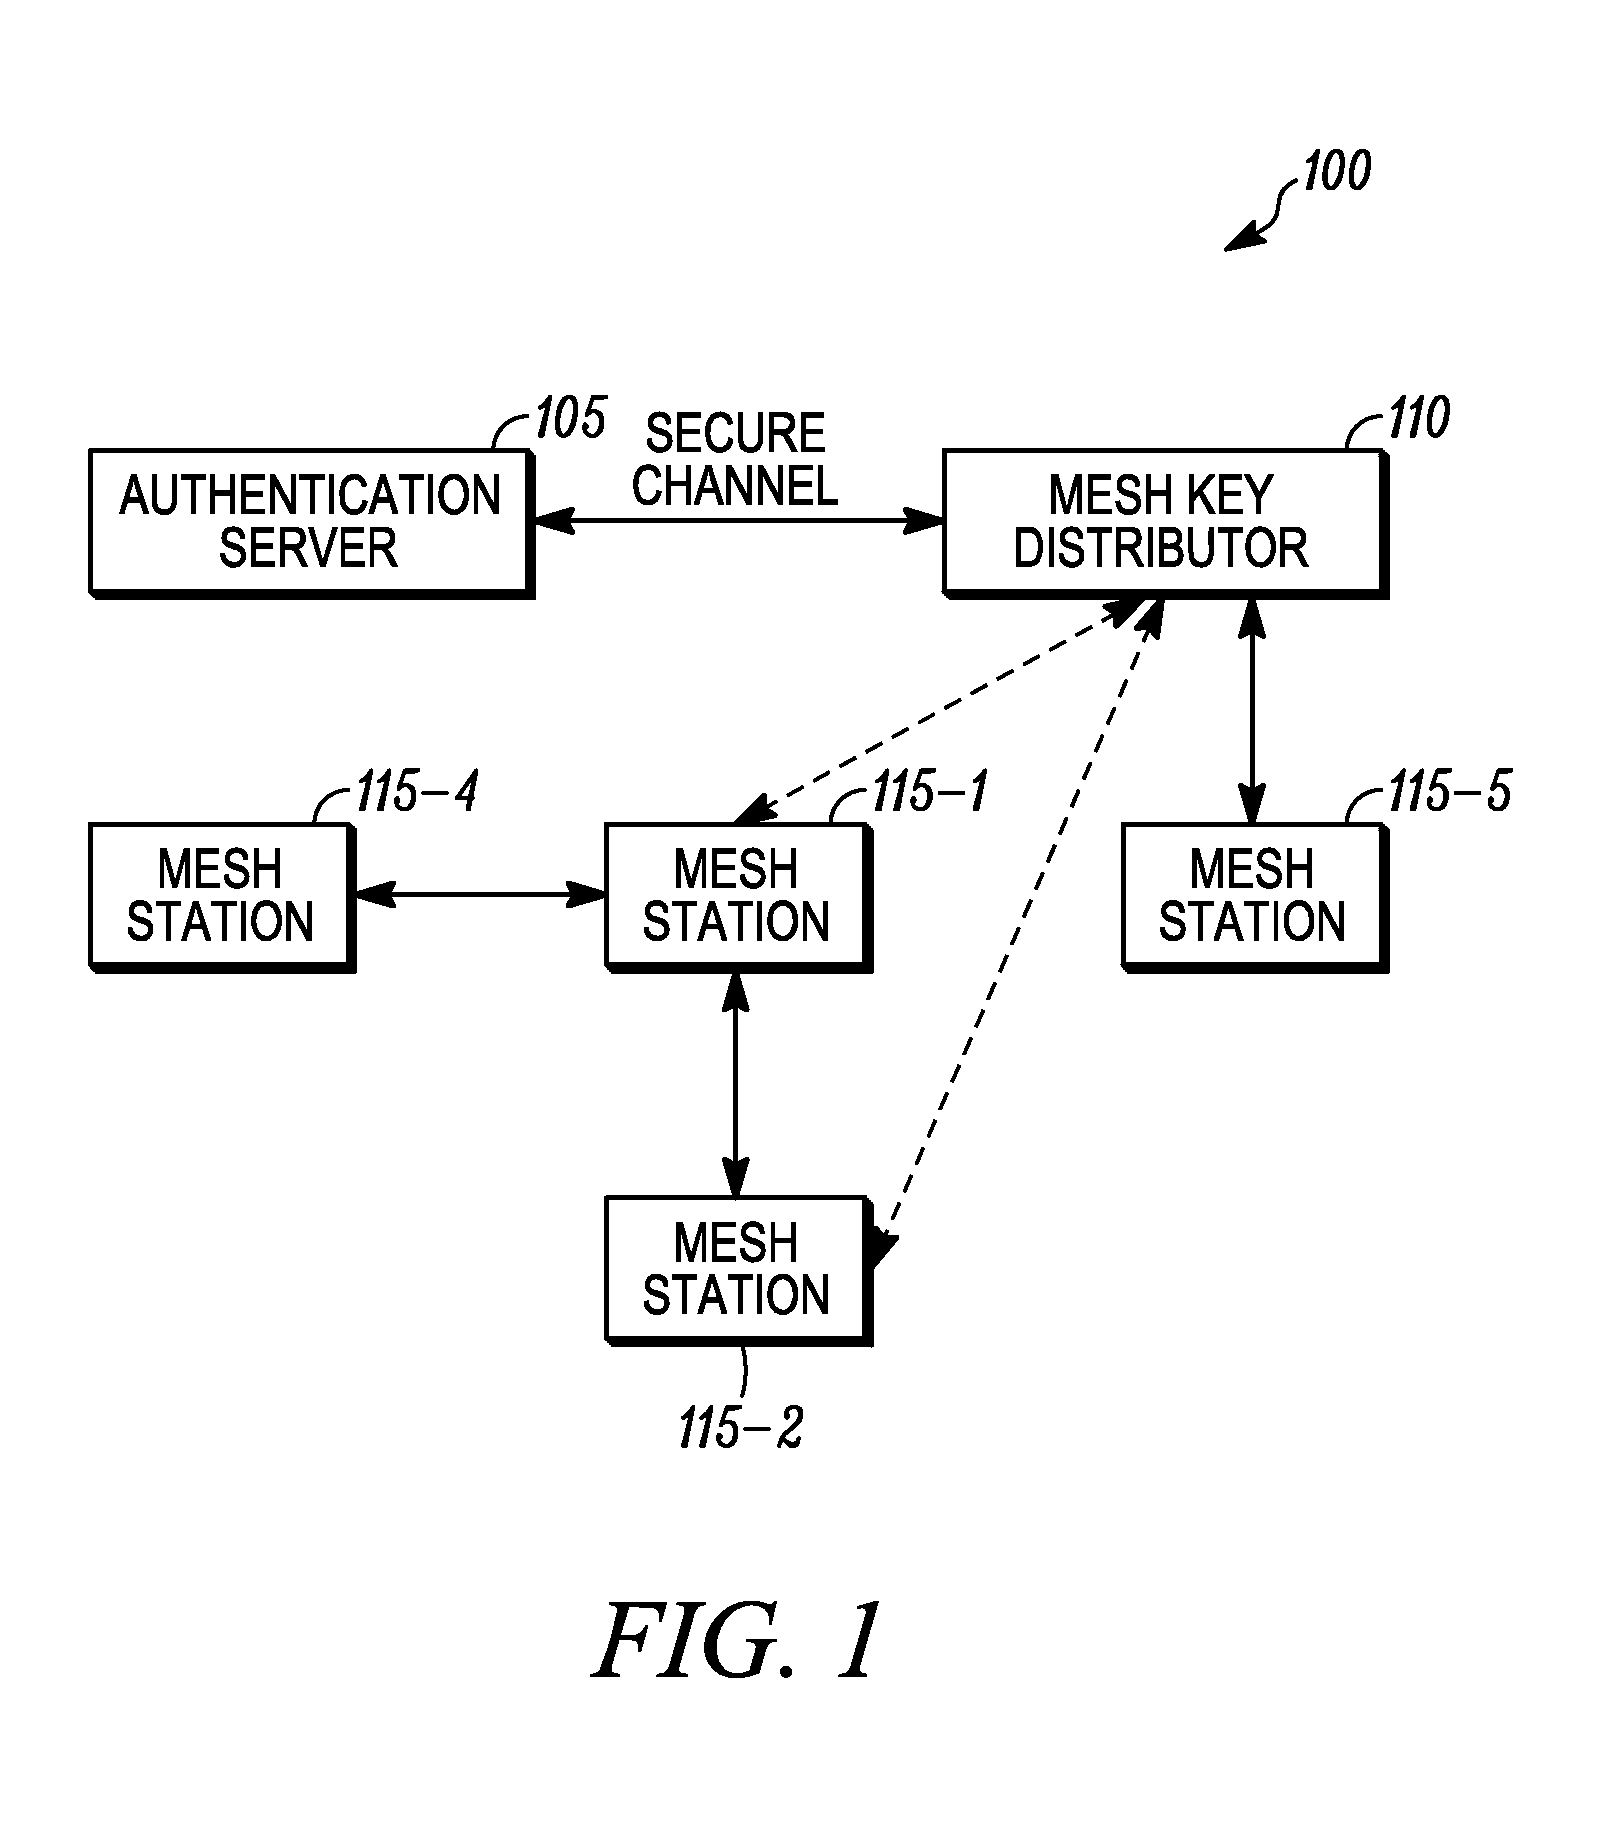 Method of triggering a key delivery from a mesh key distributor